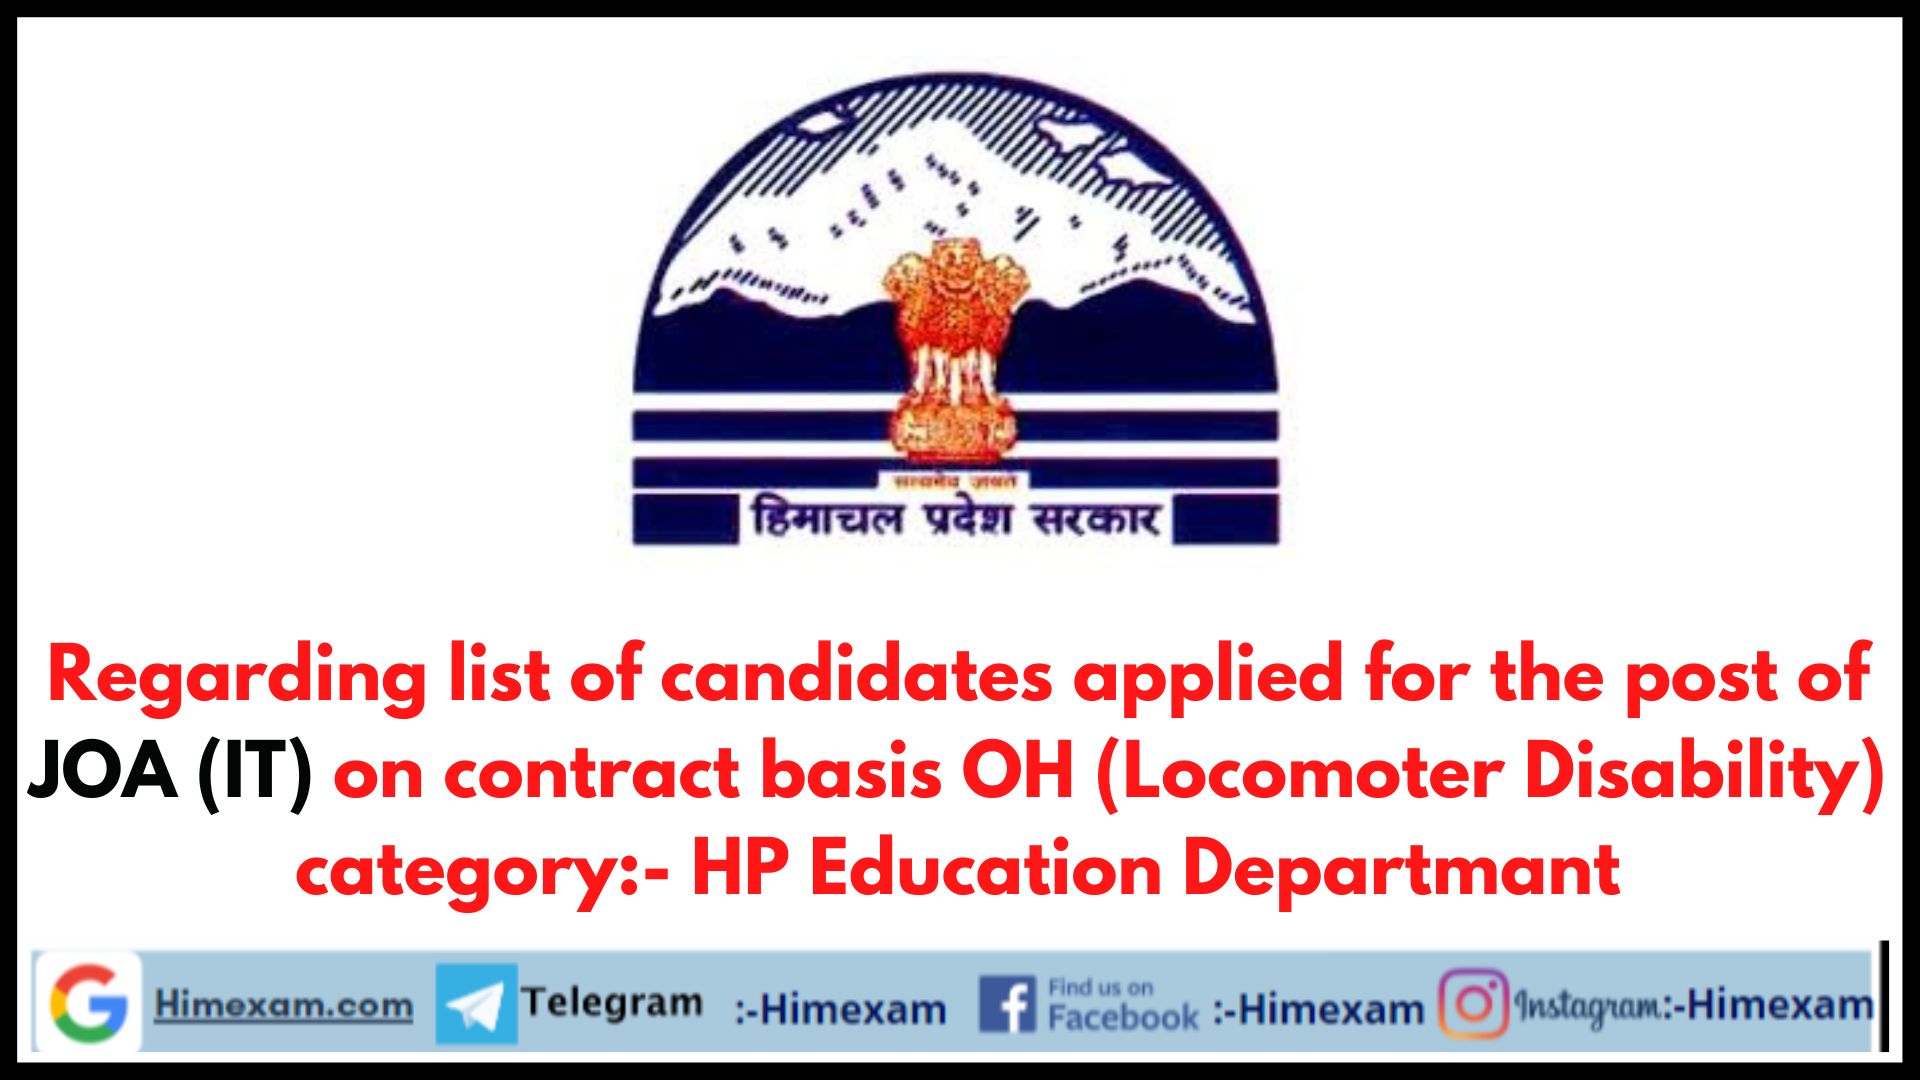 Regarding list of candidates applied for the post of JOA (IT) on contract basis OH (Locomoter Disability) category:- HP Education Departmant